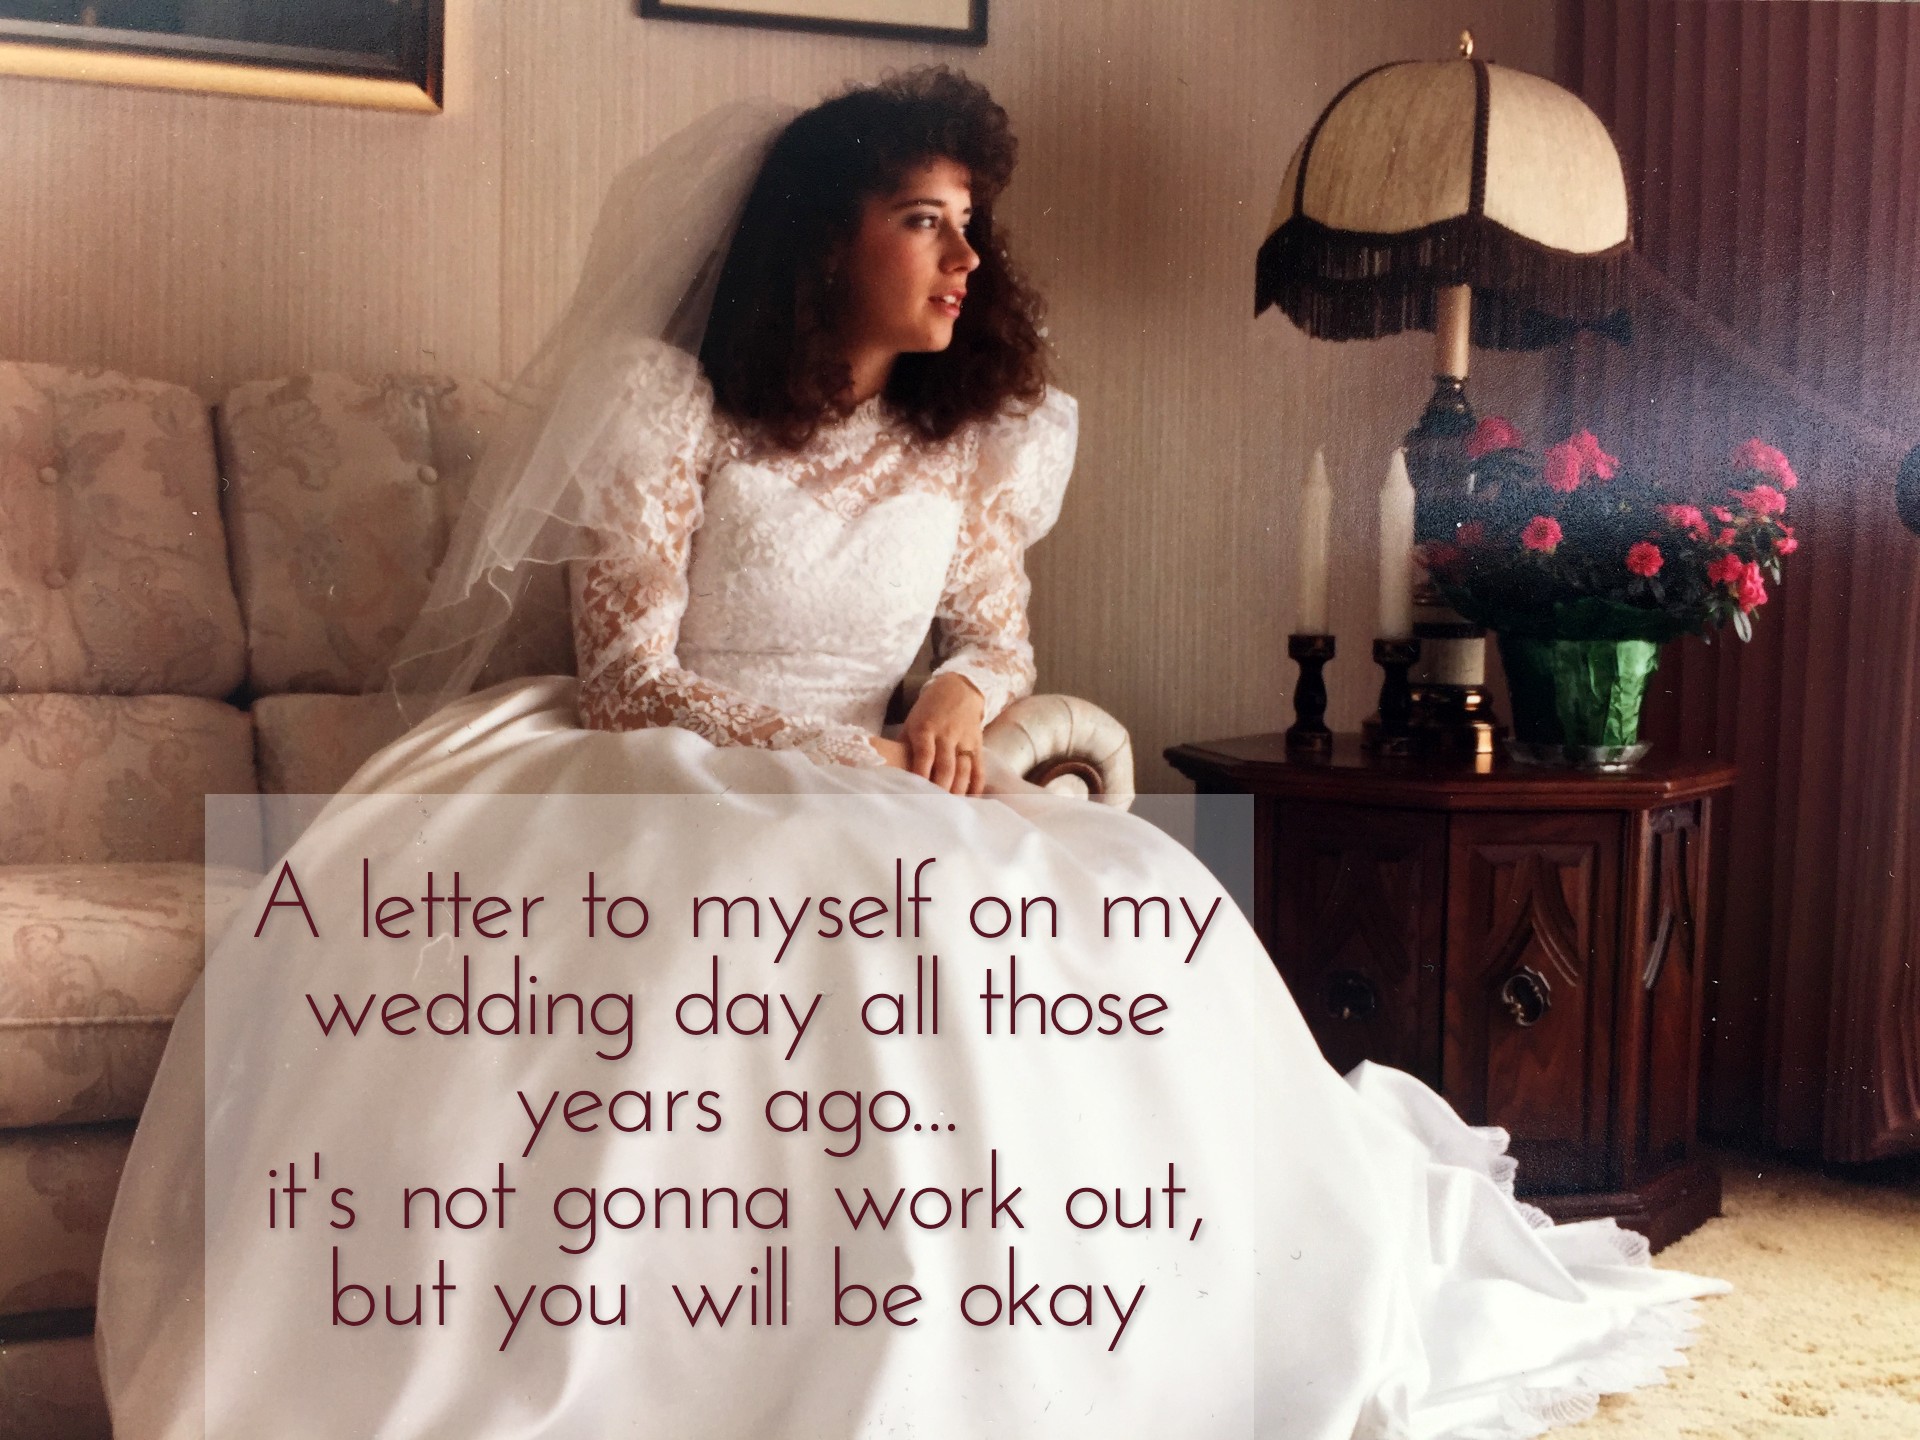 On the anniversary: A letter to myself on my wedding day all those years ago. It's not gonna work out, but you will be okay.